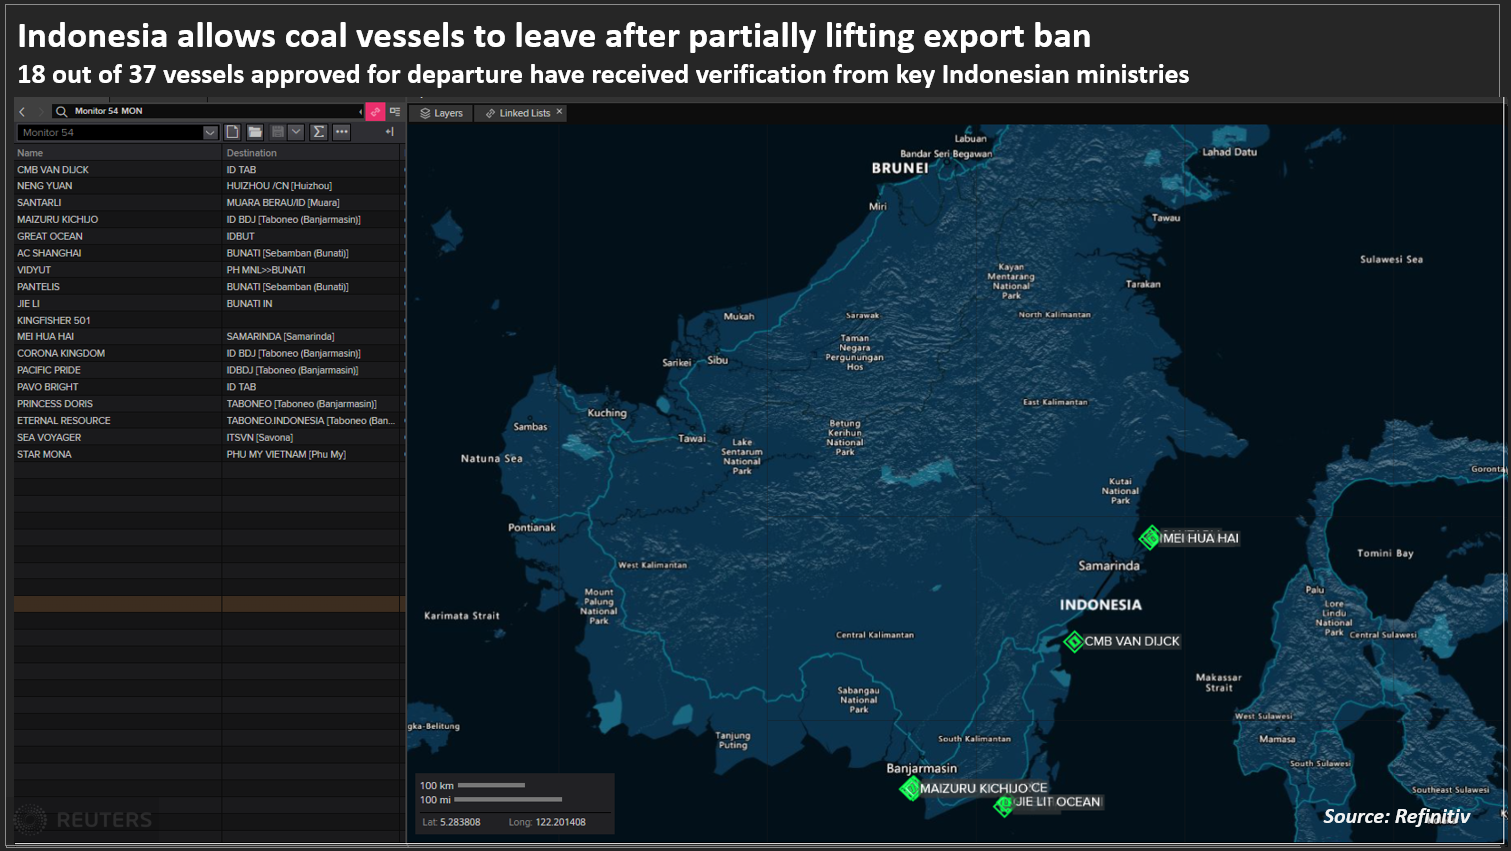 Indonesia allows coal vessels to leave after partially lifting export ban